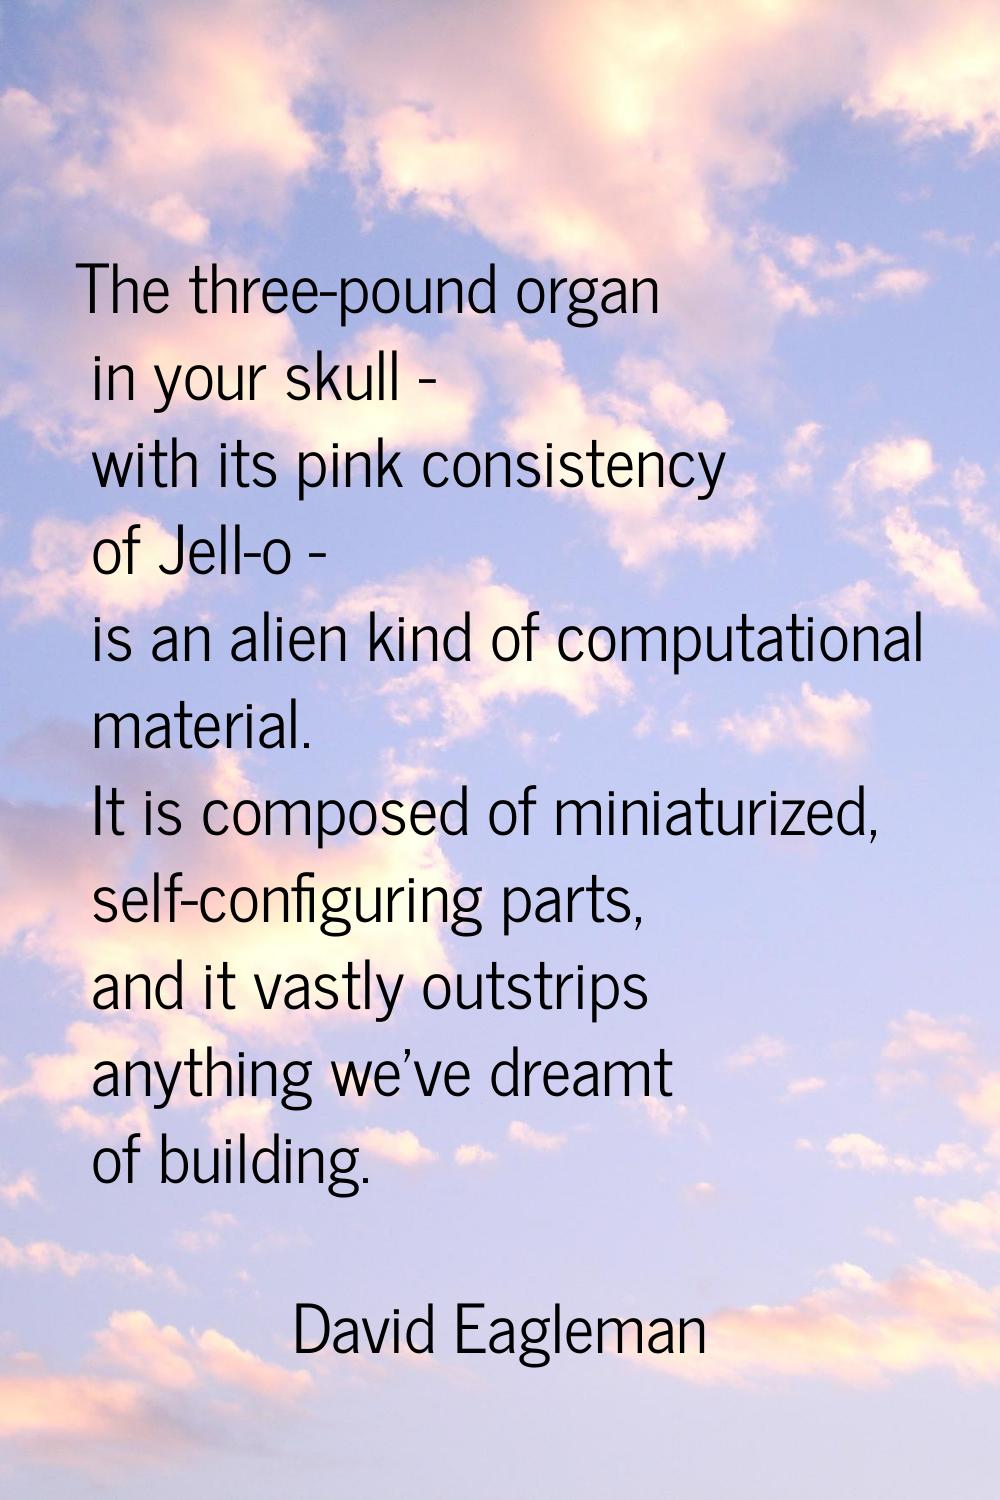 The three-pound organ in your skull - with its pink consistency of Jell-o - is an alien kind of com